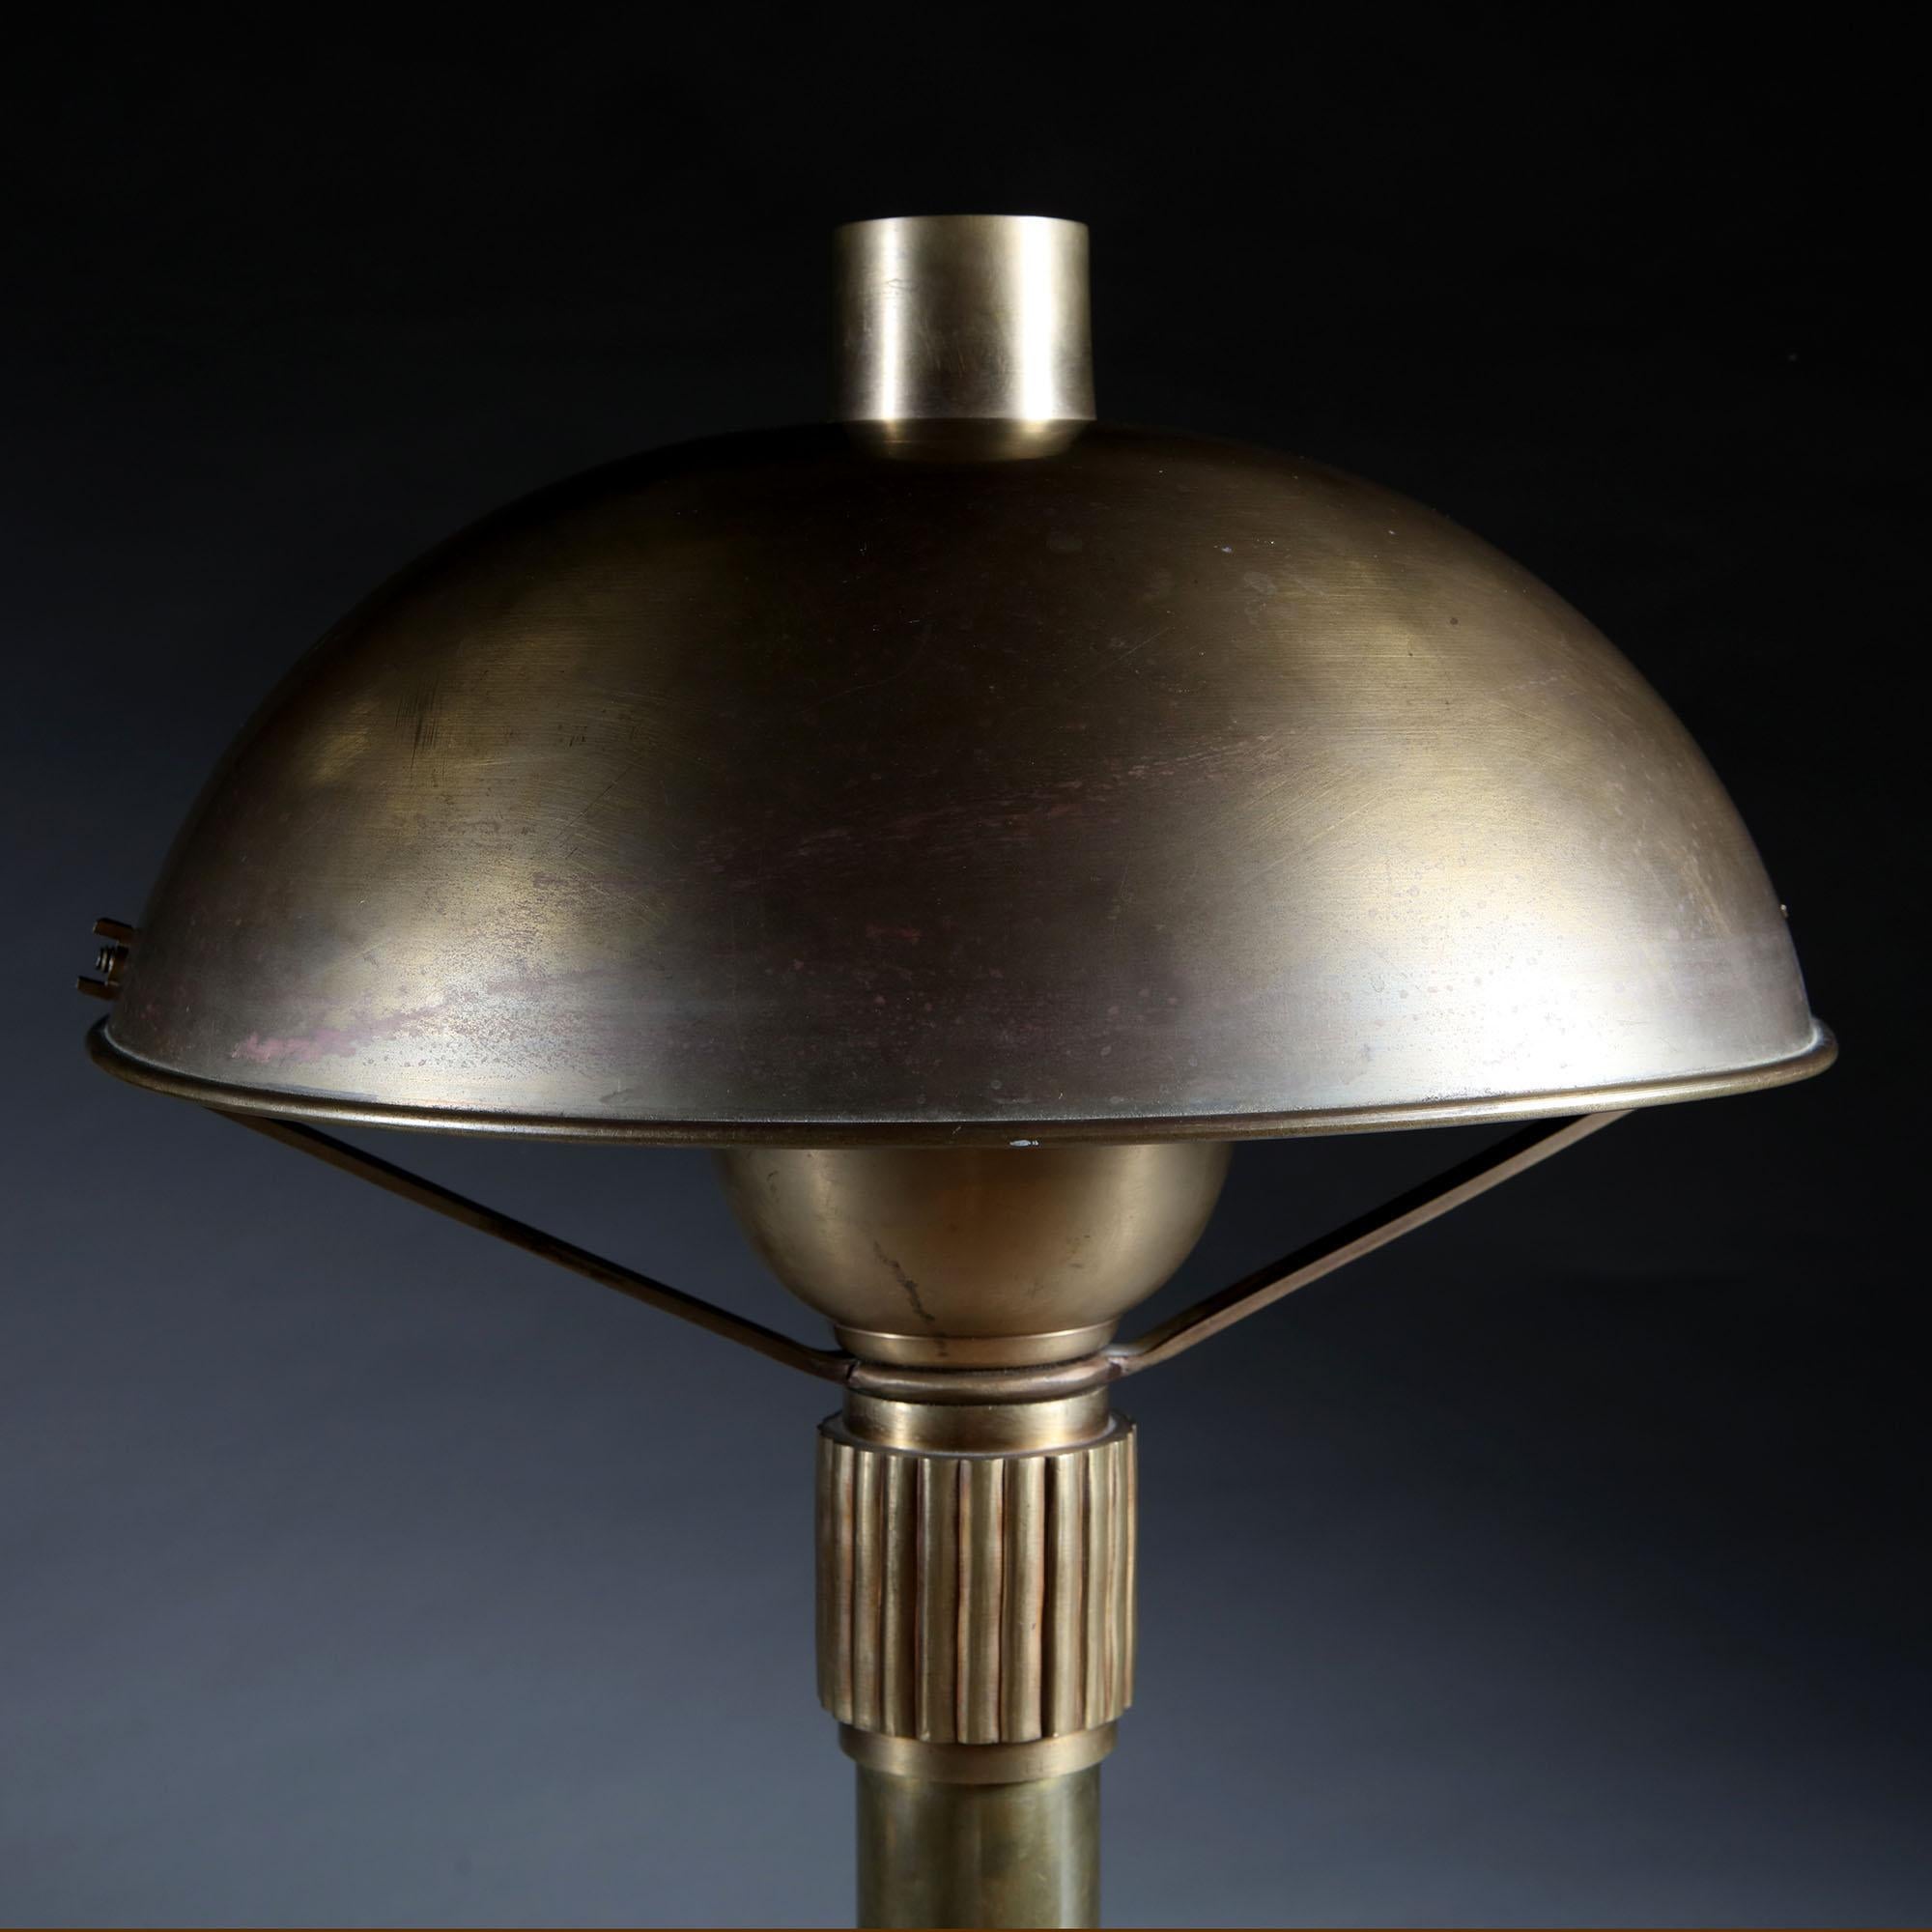 An Art Deco brass lamp with domed brass shade, with fluting to the top and base of the column, all supported on a circular base. Attributed to Perzel.

Perzel is a French lighting design house, originally founded by Jean Perzel in 1923, after having